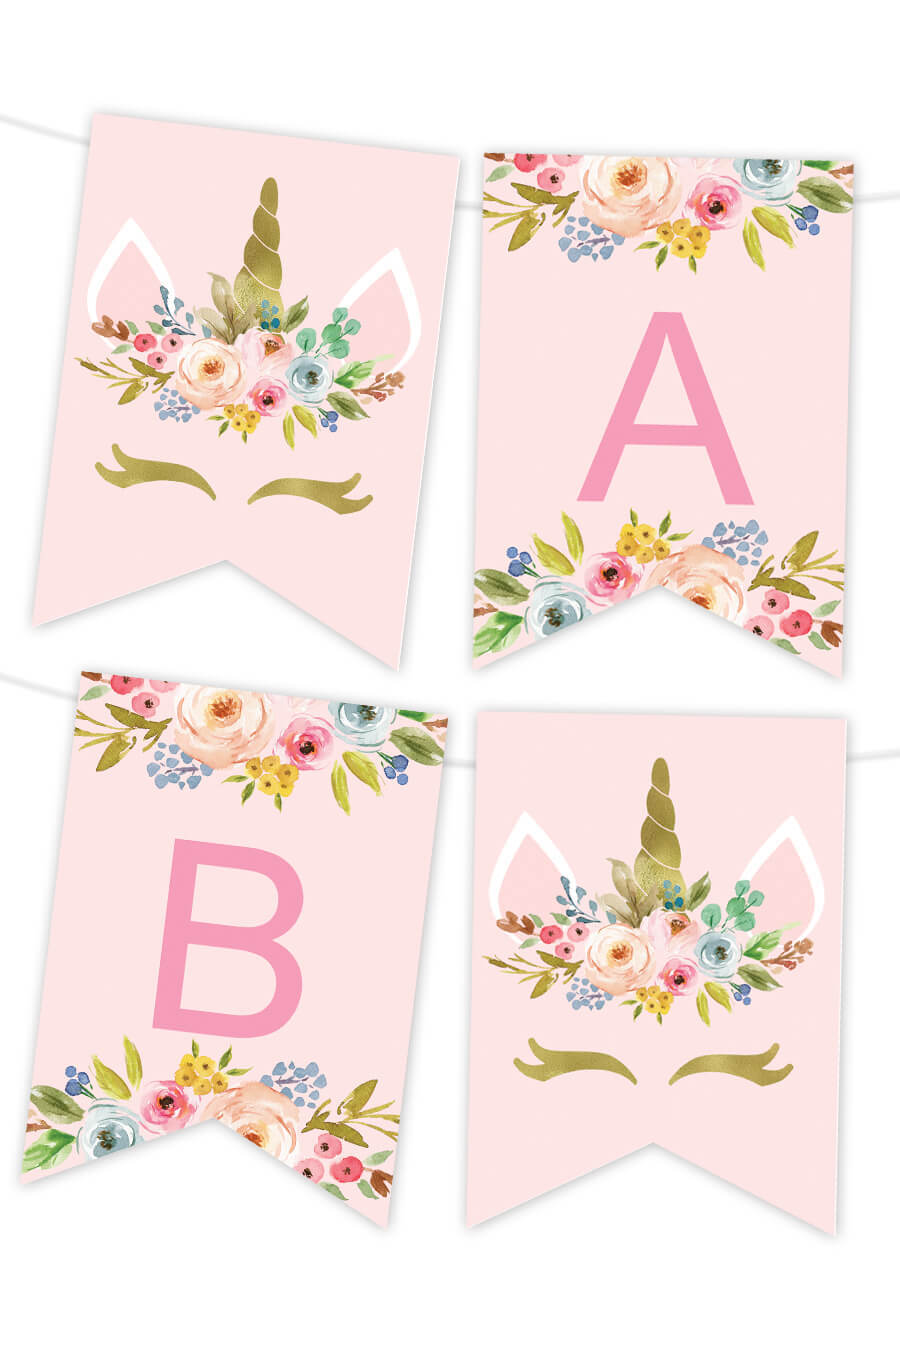 Printable Banners – Make Your Own Banners With Our Printable Pertaining To Diy Banner Template Free